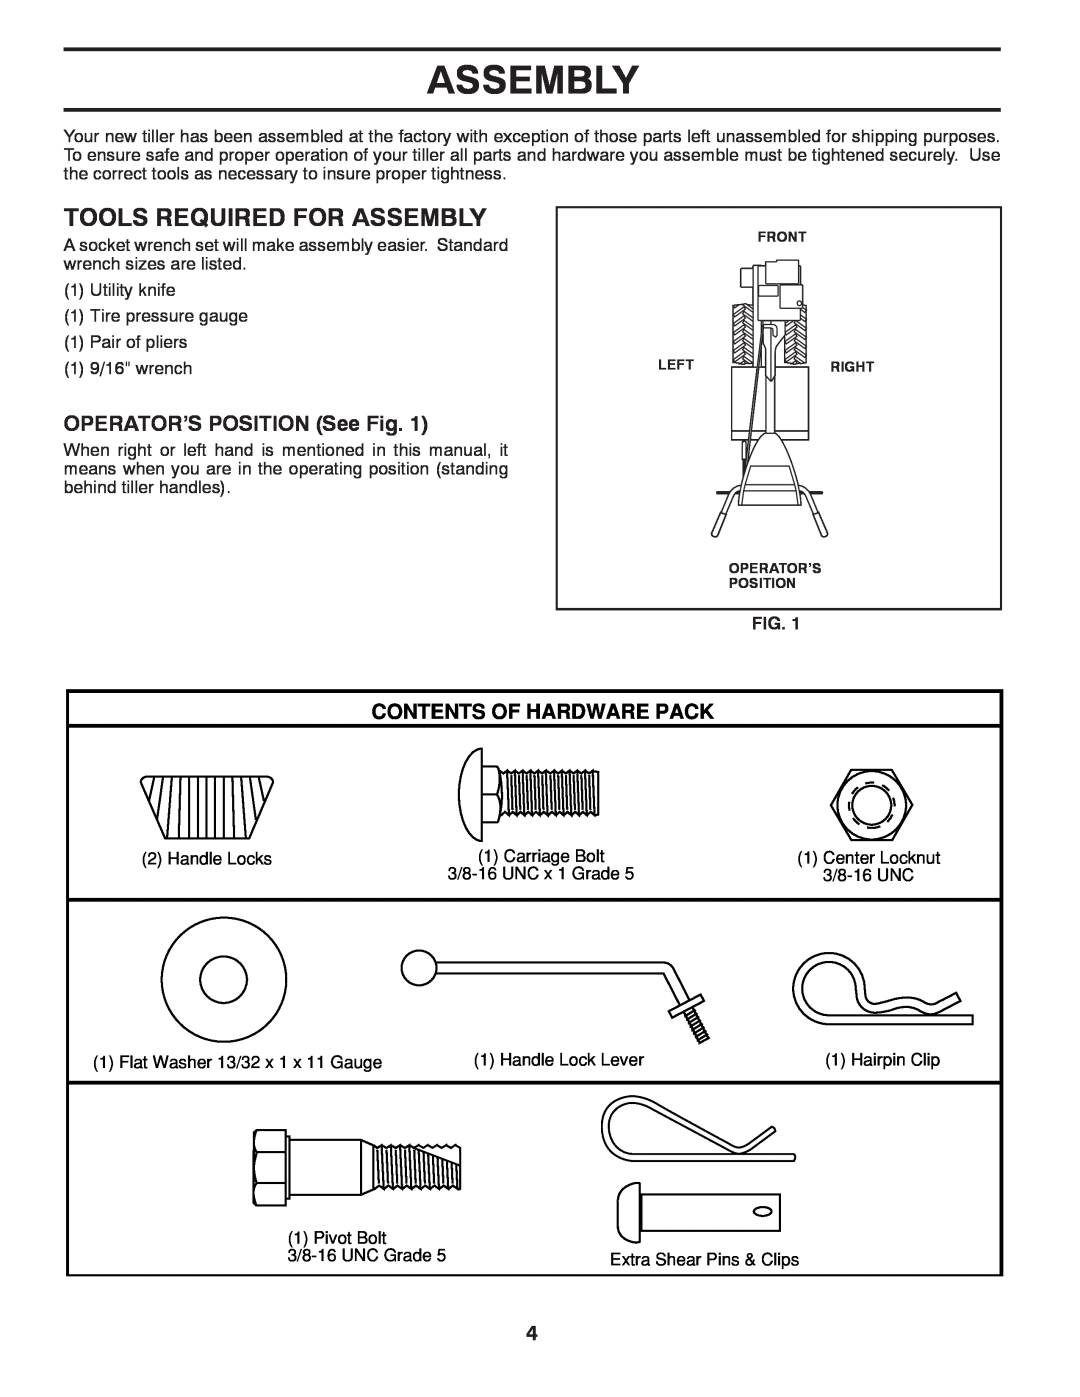 Poulan 417150, 96092001300 manual Tools Required For Assembly, OPERATOR’S POSITION See Fig, Contents Of Hardware Pack 